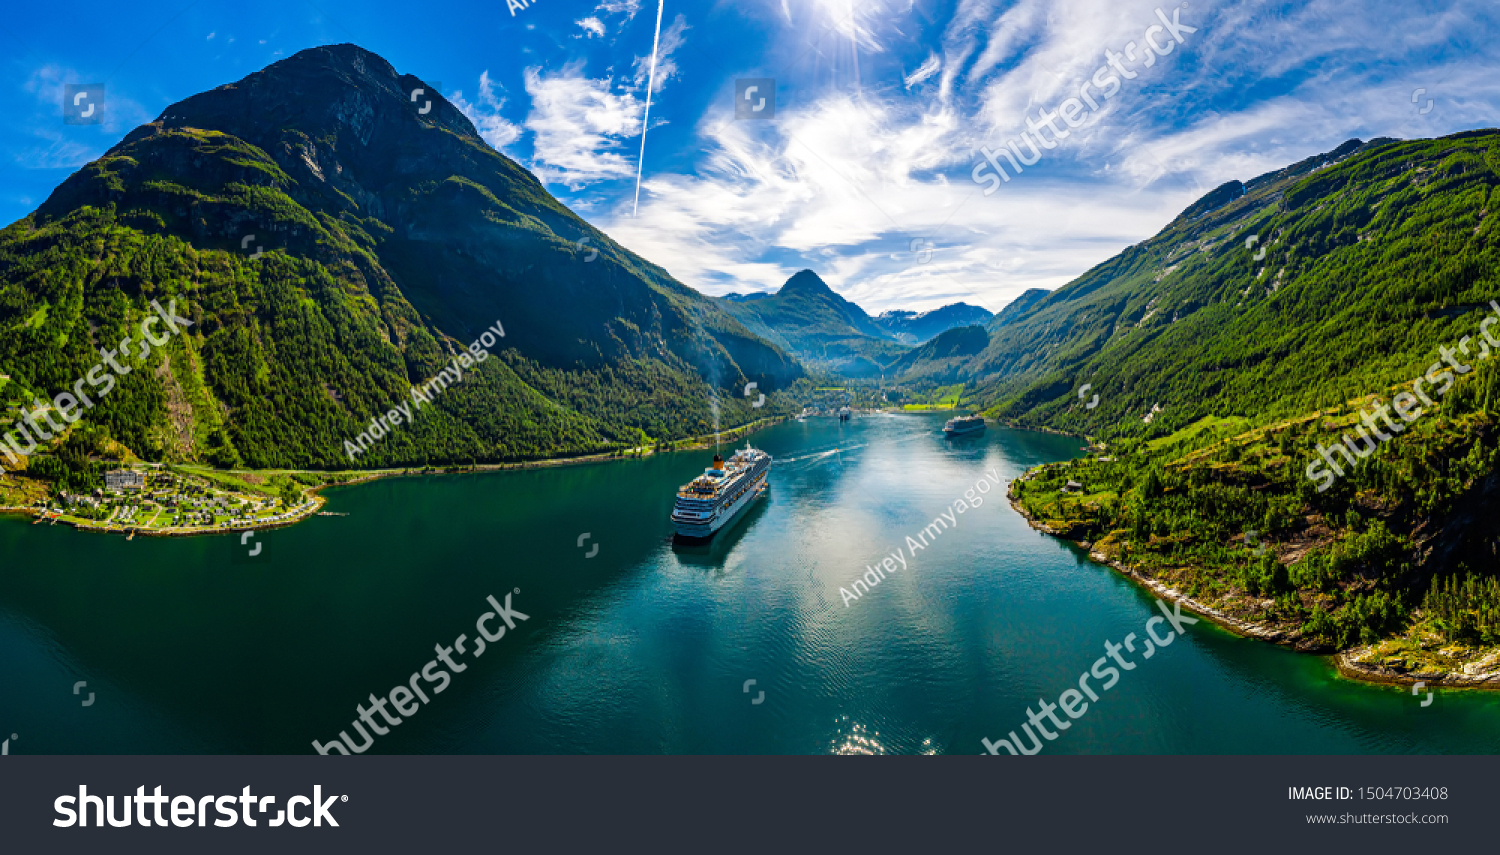 Geiranger fjord, Beautiful Nature Norway. The fjord is one of Norway's most visited tourist sites. Geiranger Fjord, a UNESCO World Heritage Site #1504703408